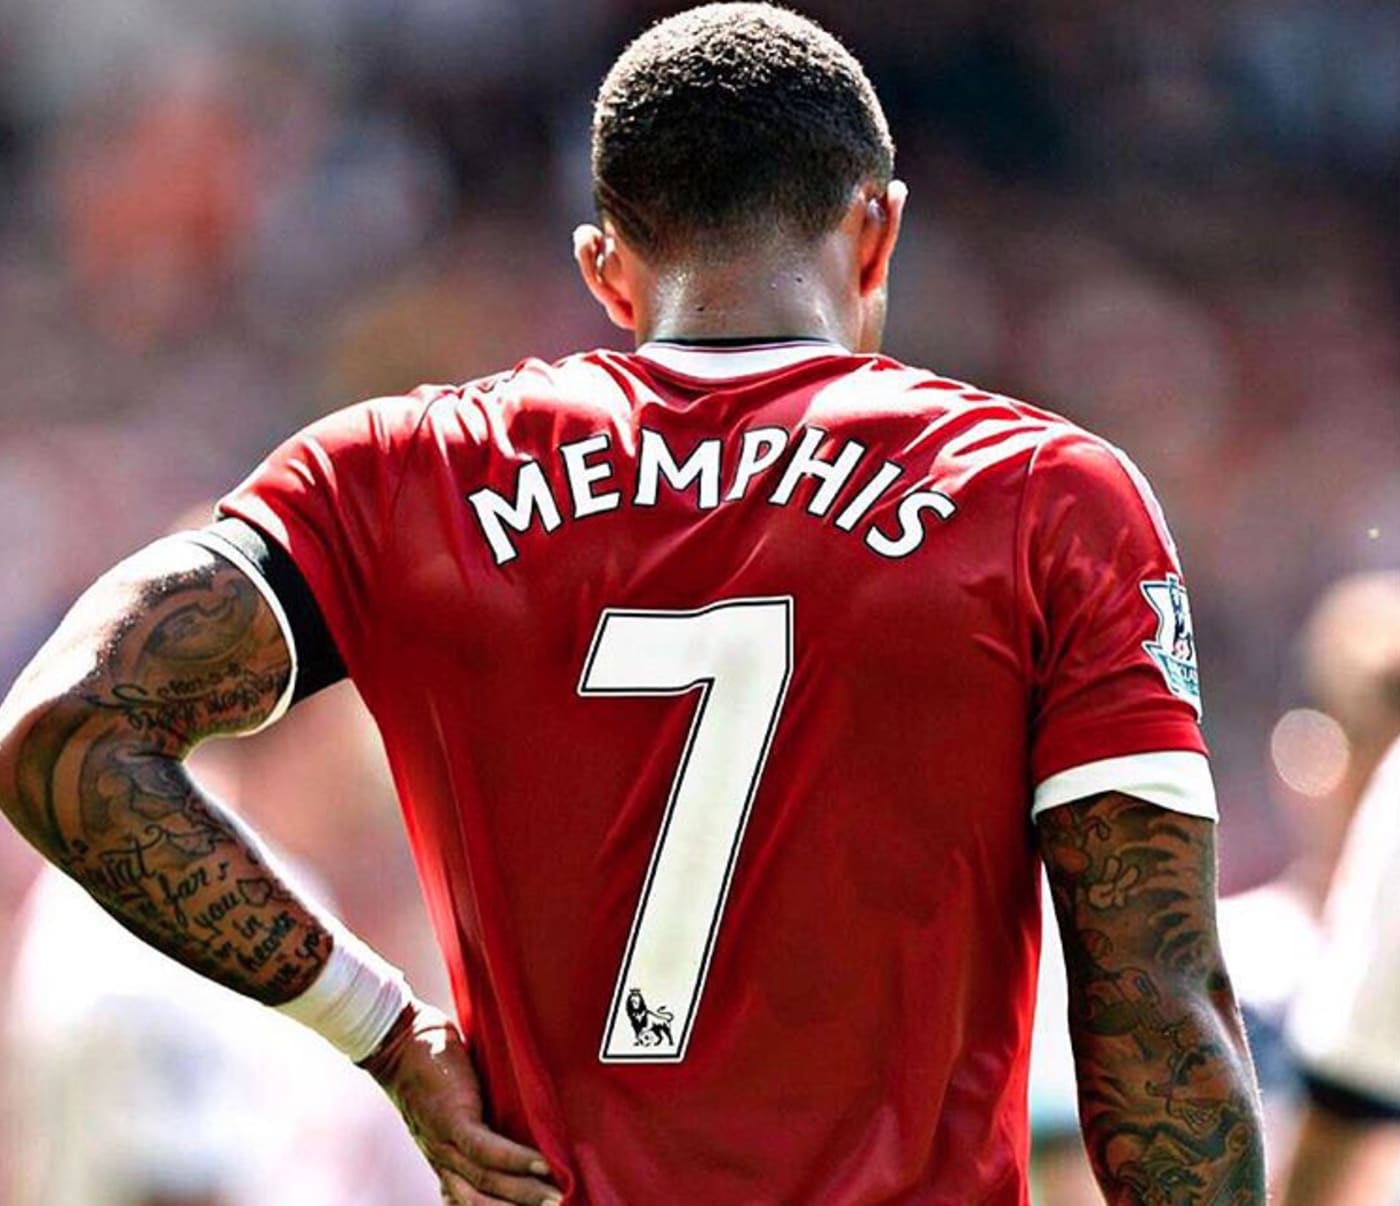 Memphis Depay Has Sold More Shirts Than Anyone Else in the Premier